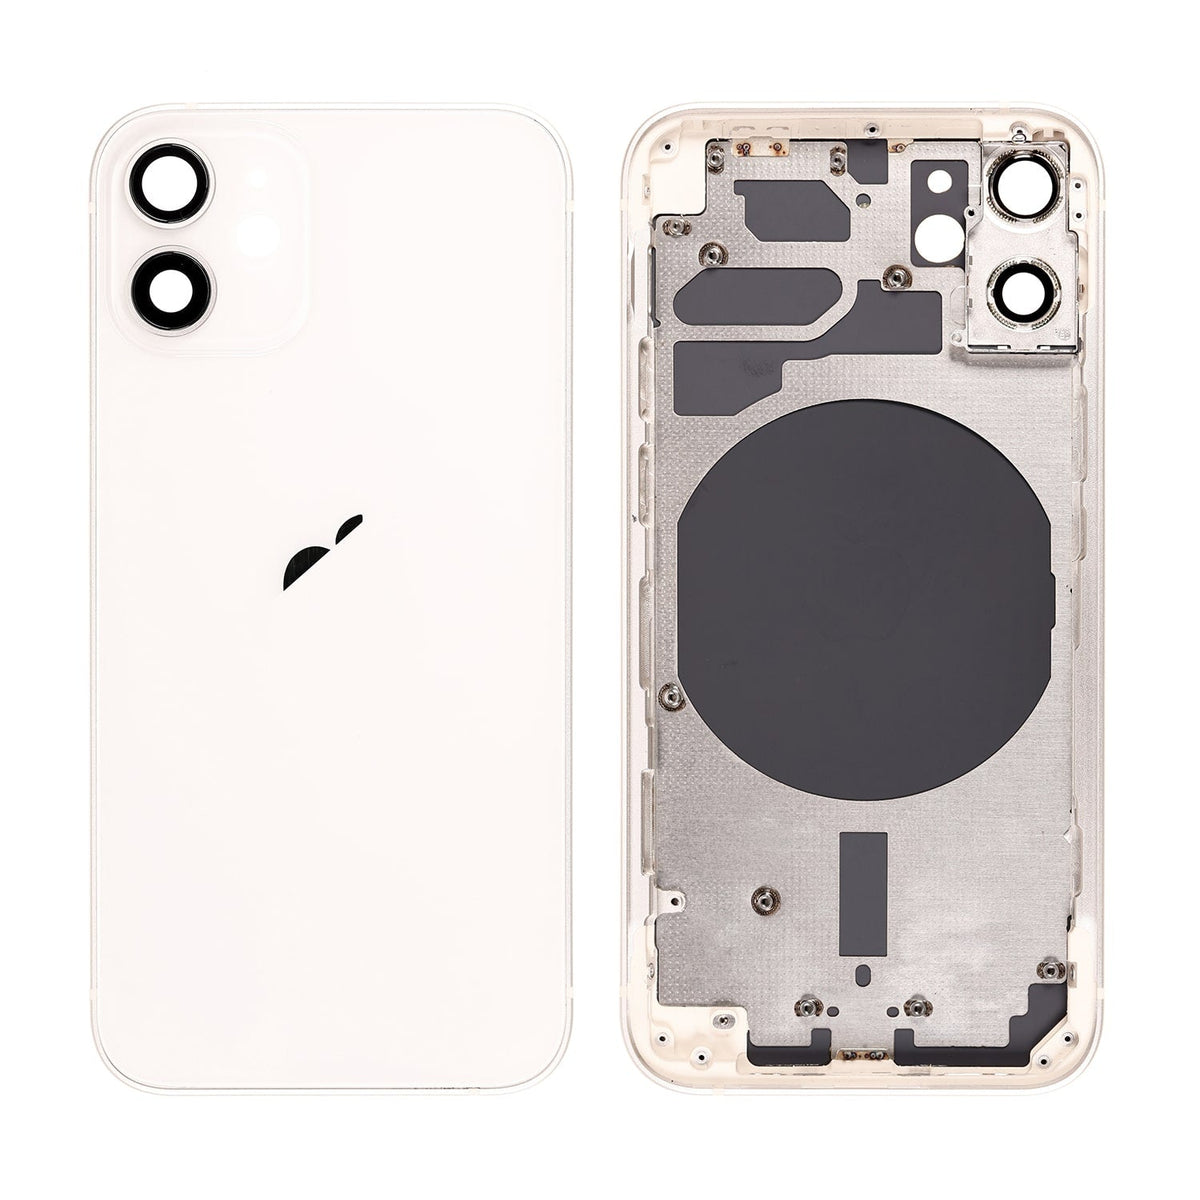 WHITE REAR HOUSING WITH FRAME FOR IPHONE 12 MINI